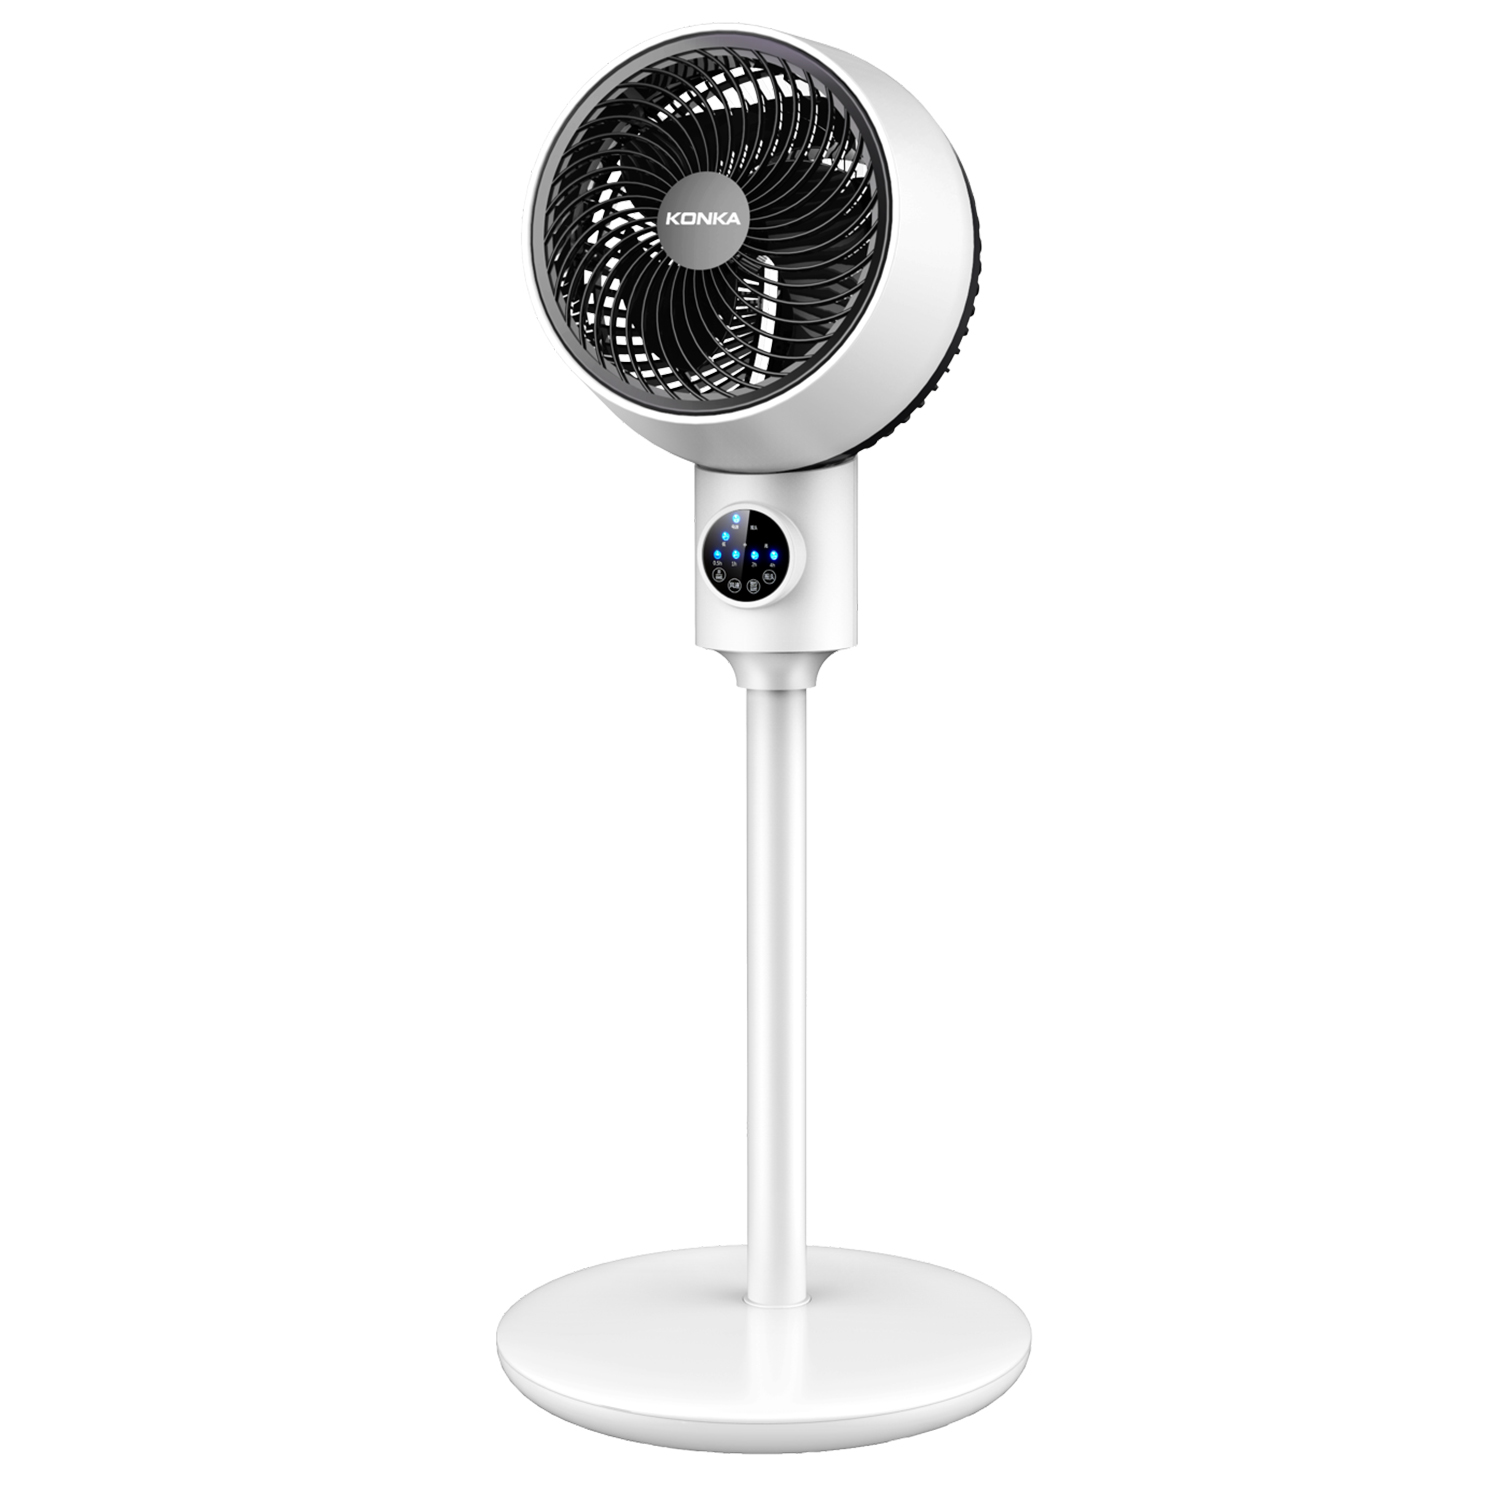 SUGIFT Fans for Home, Whole Room Air Circulator Fan, 3 Speeds for Office, Bedroom, White - image 1 of 7